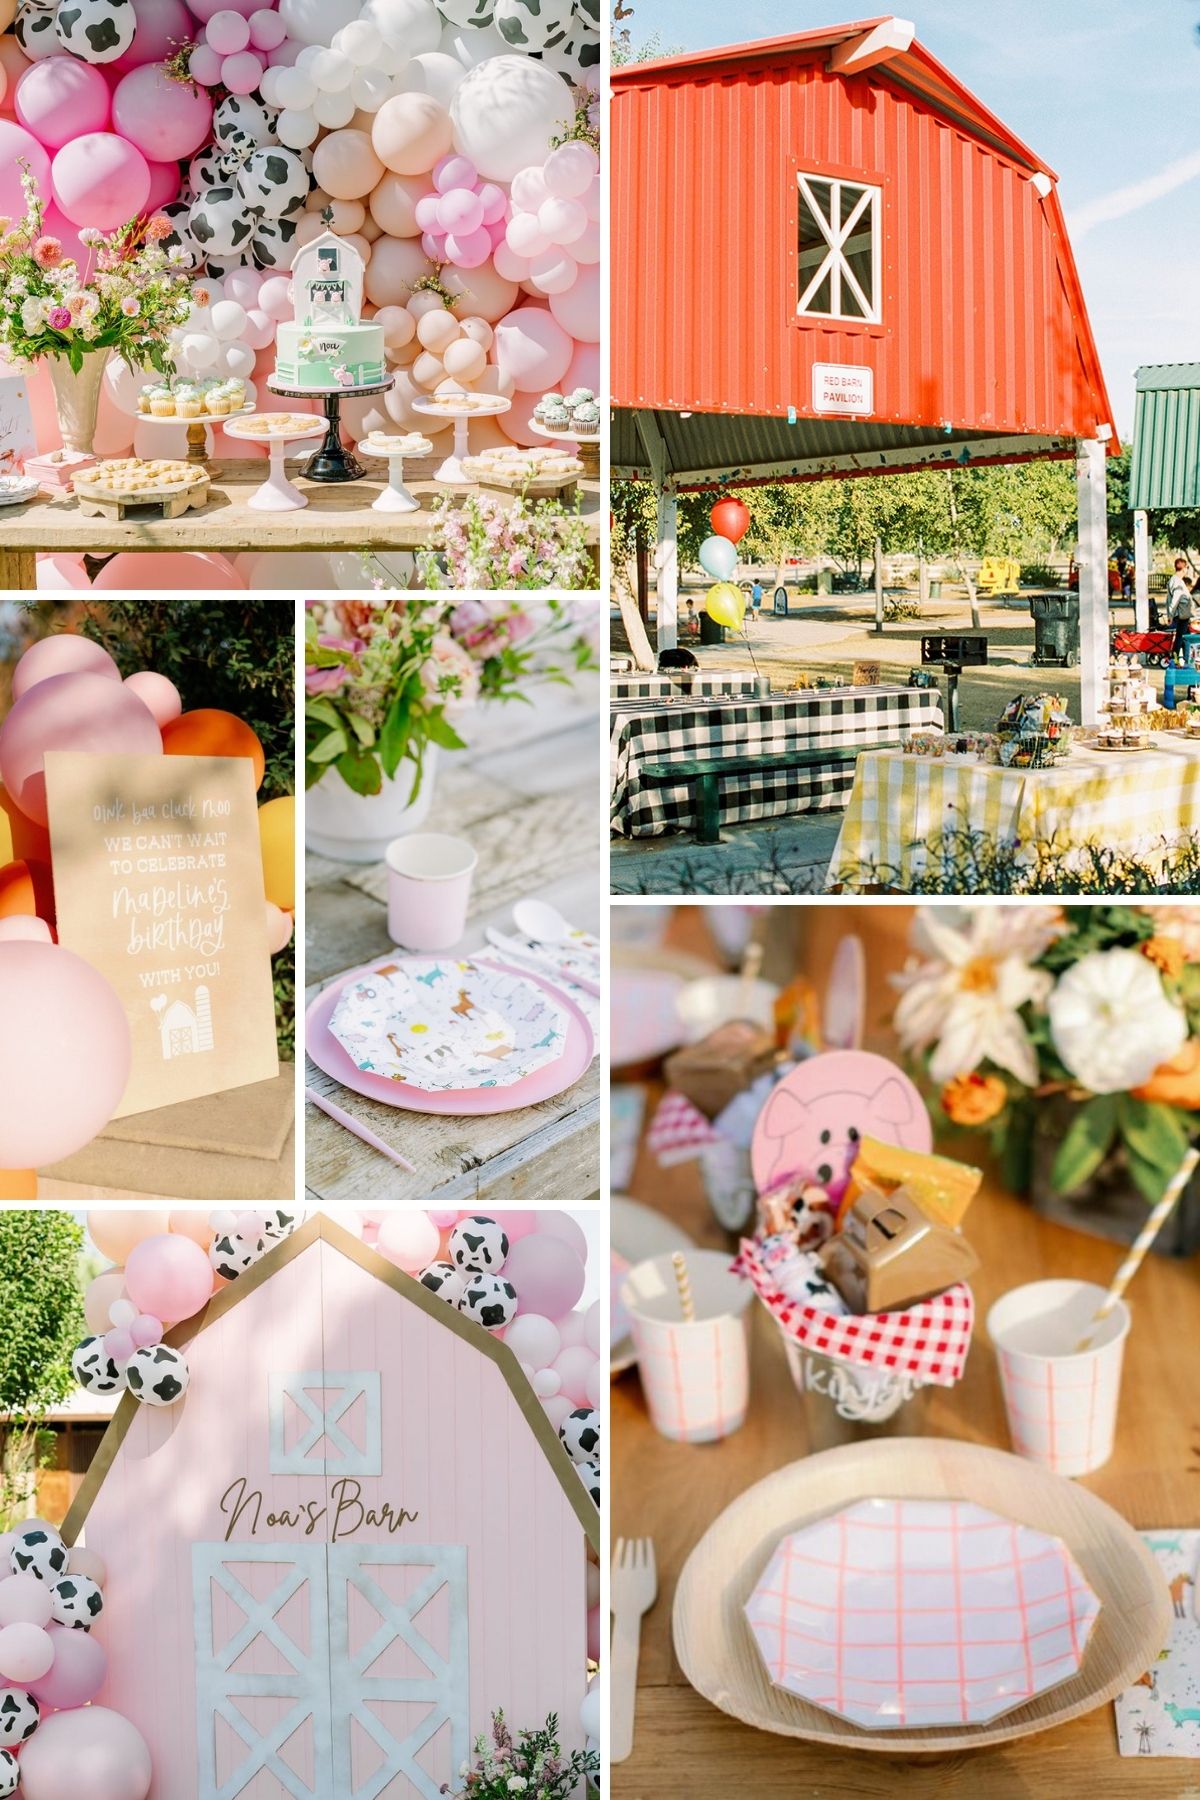 Photo collage for down of the farm party theme including table settings, balloons, and party favors.